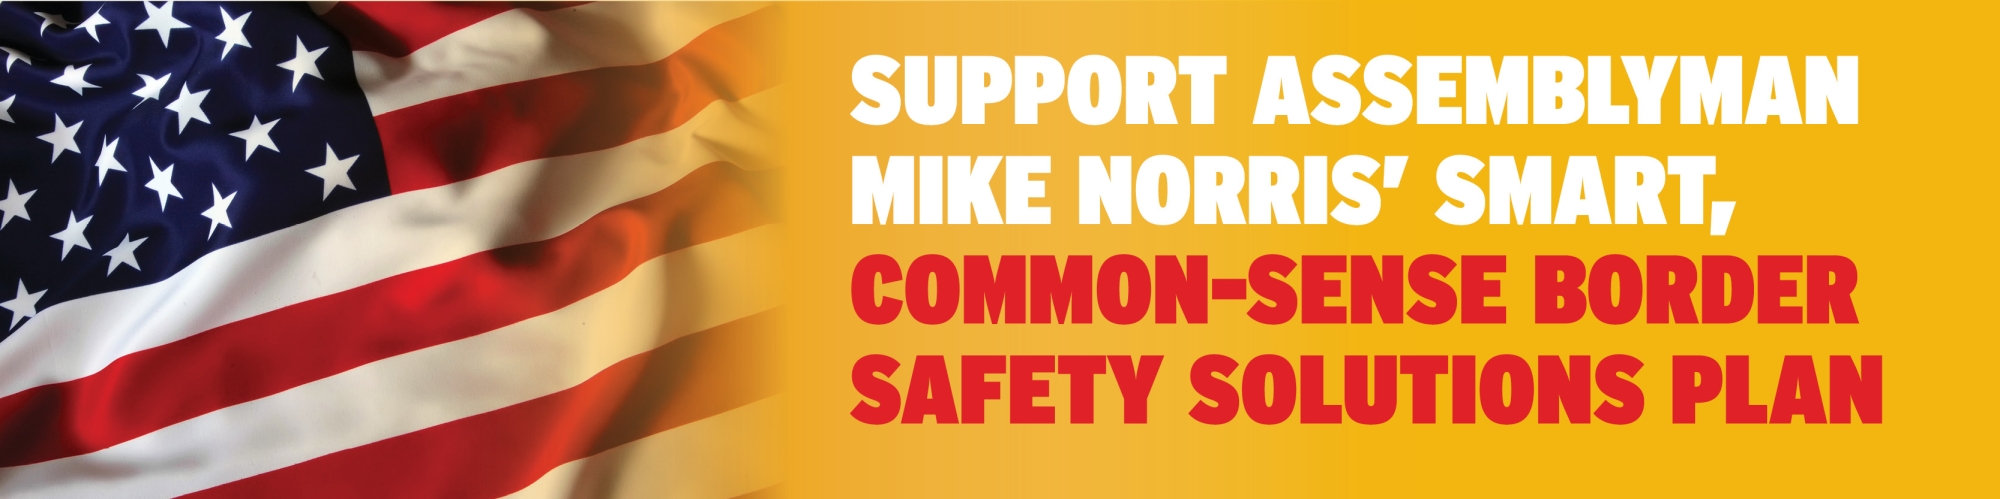 Support Assemblyman Mike Norris' Smart, Common-Sense Border Safety Solutions Plan